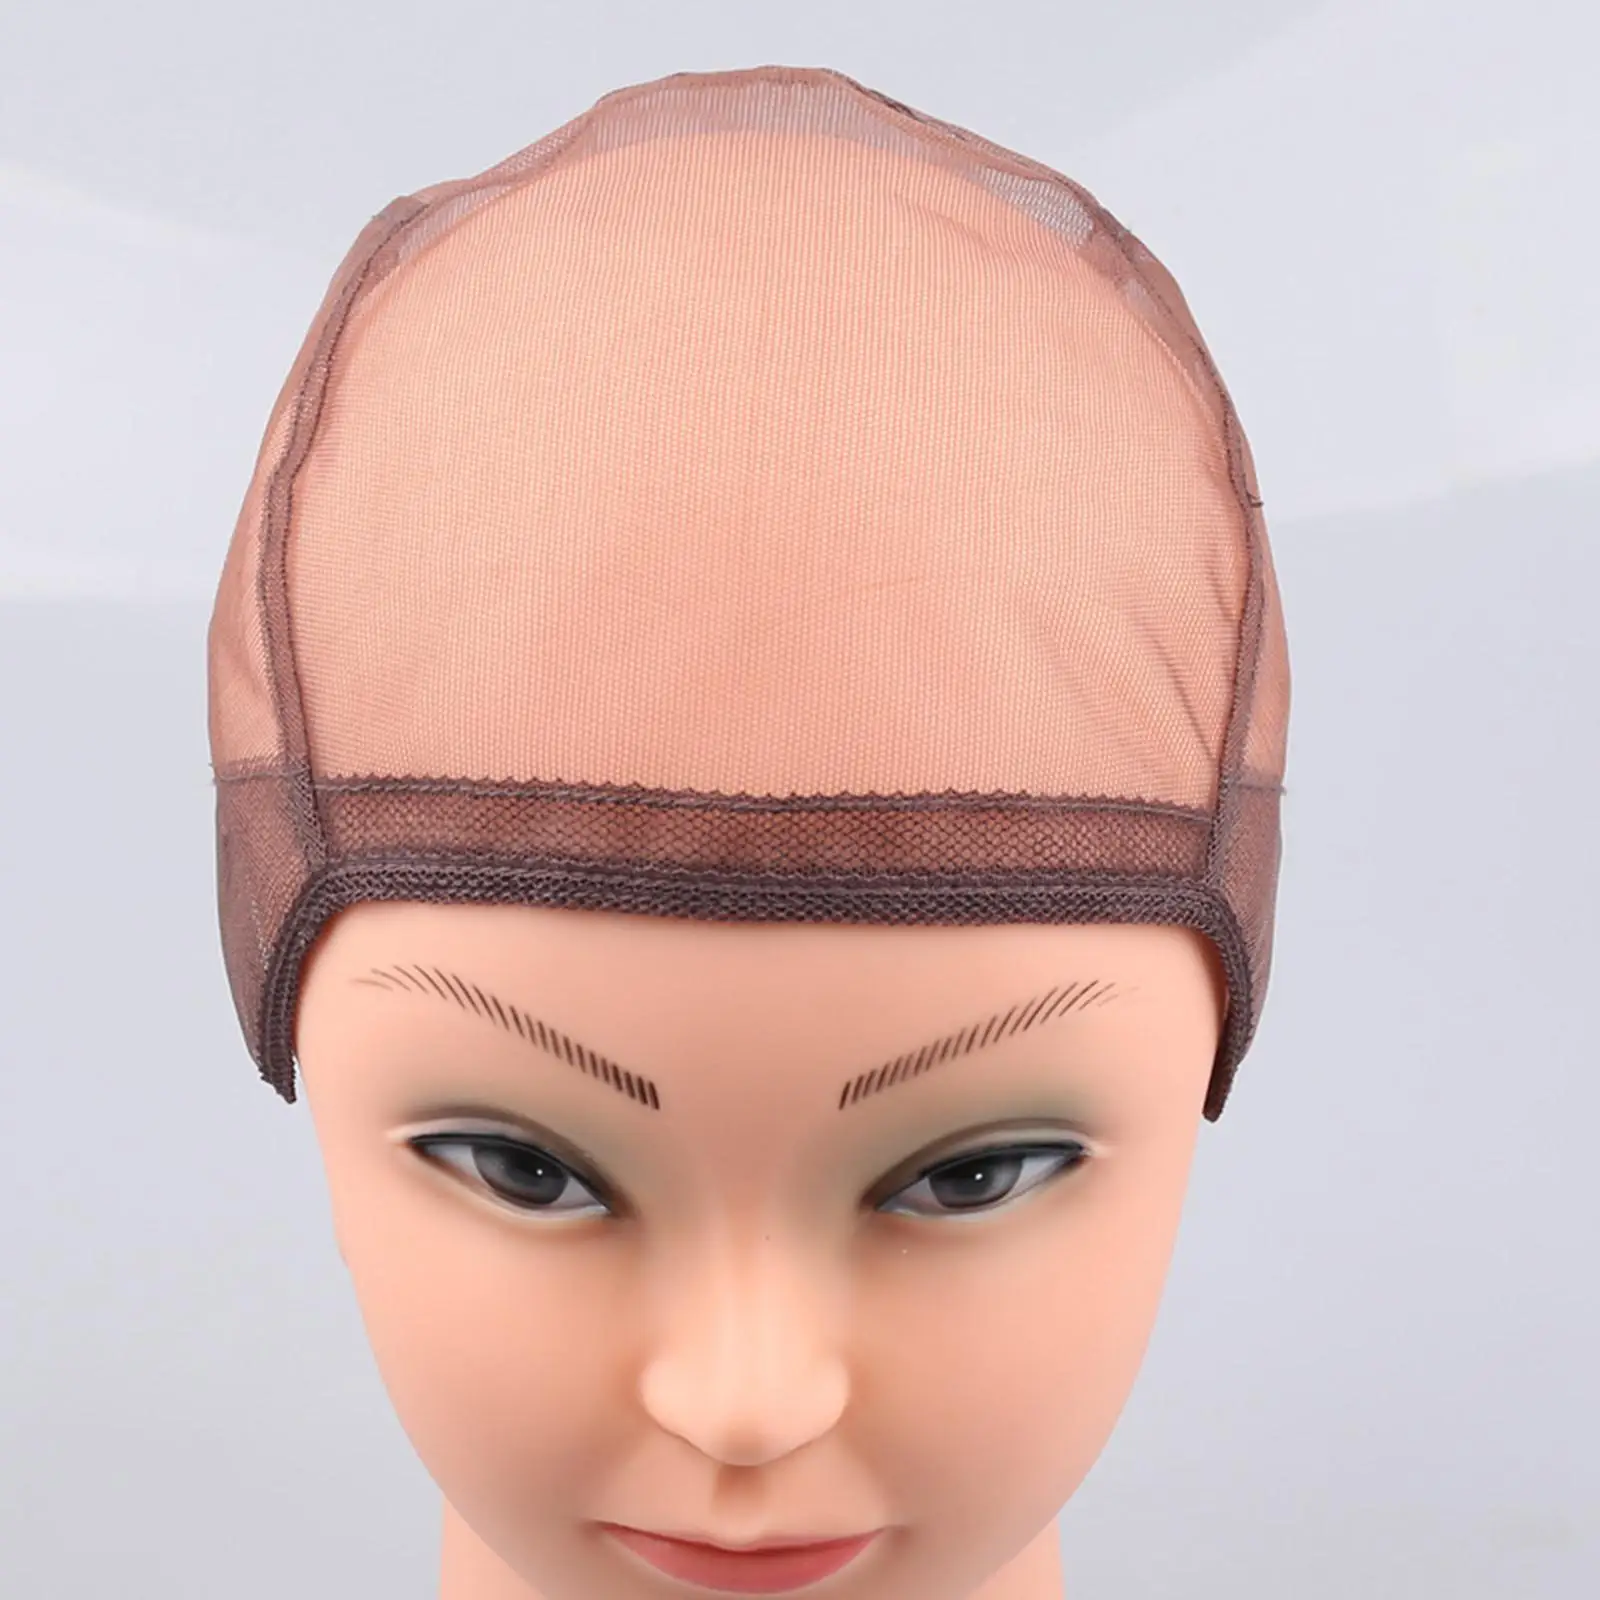 Wig Hat Lightweight Stretchy Adjustable for Making Wigs Wig Accessories Hair Mesh Net Cover